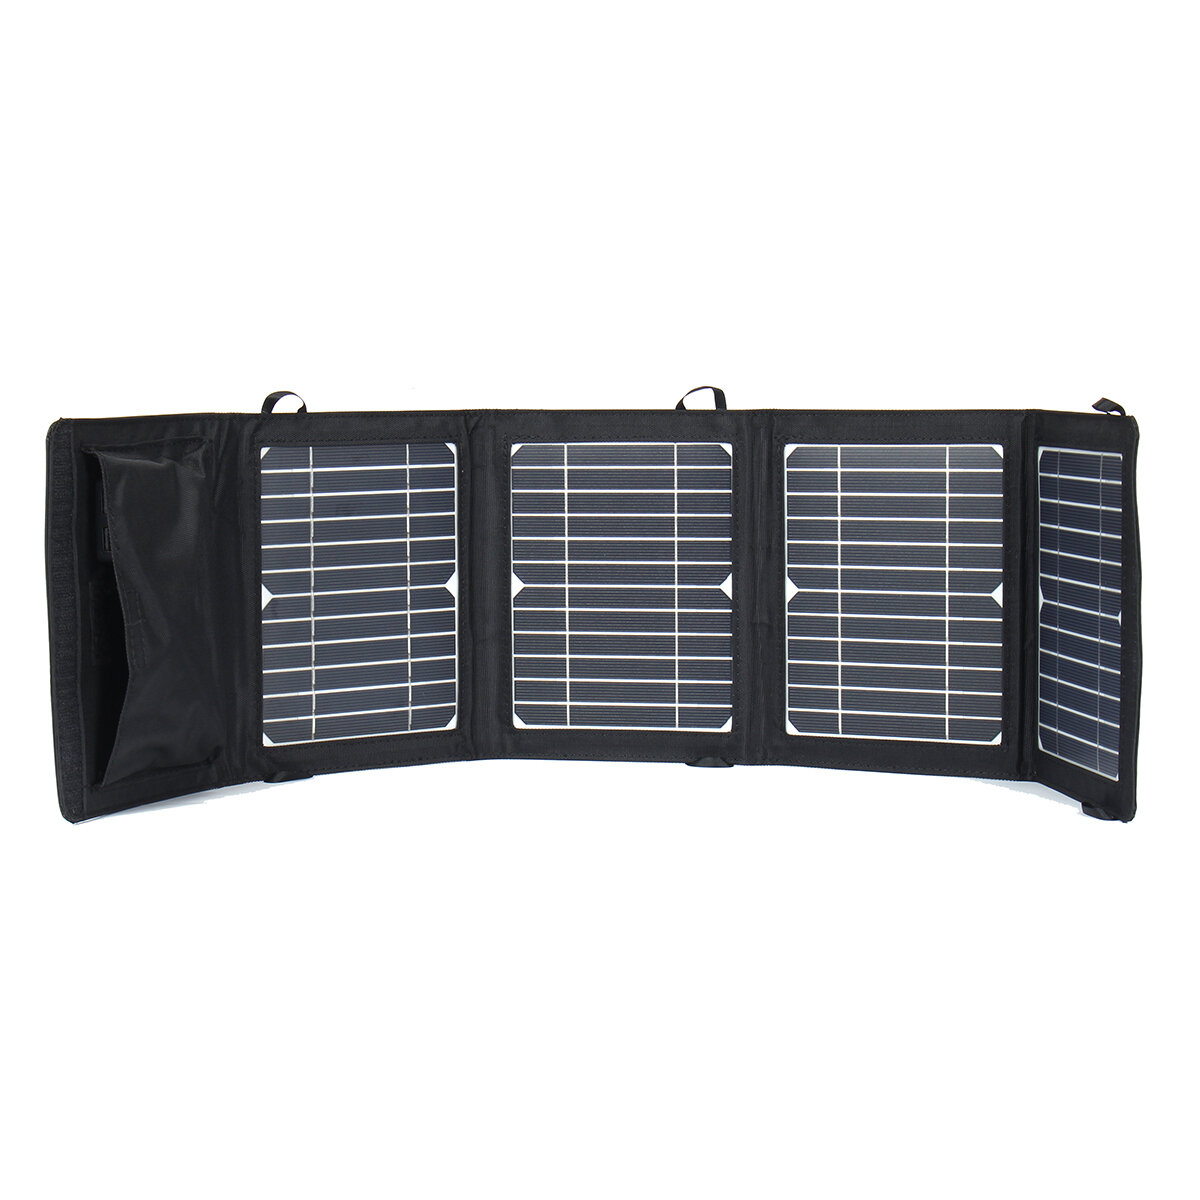 Image of 14W Solar Panel Outdoor Waterproof Superior Monocrystalline Solar Power Cell Battery Charger for Car Camping Phone